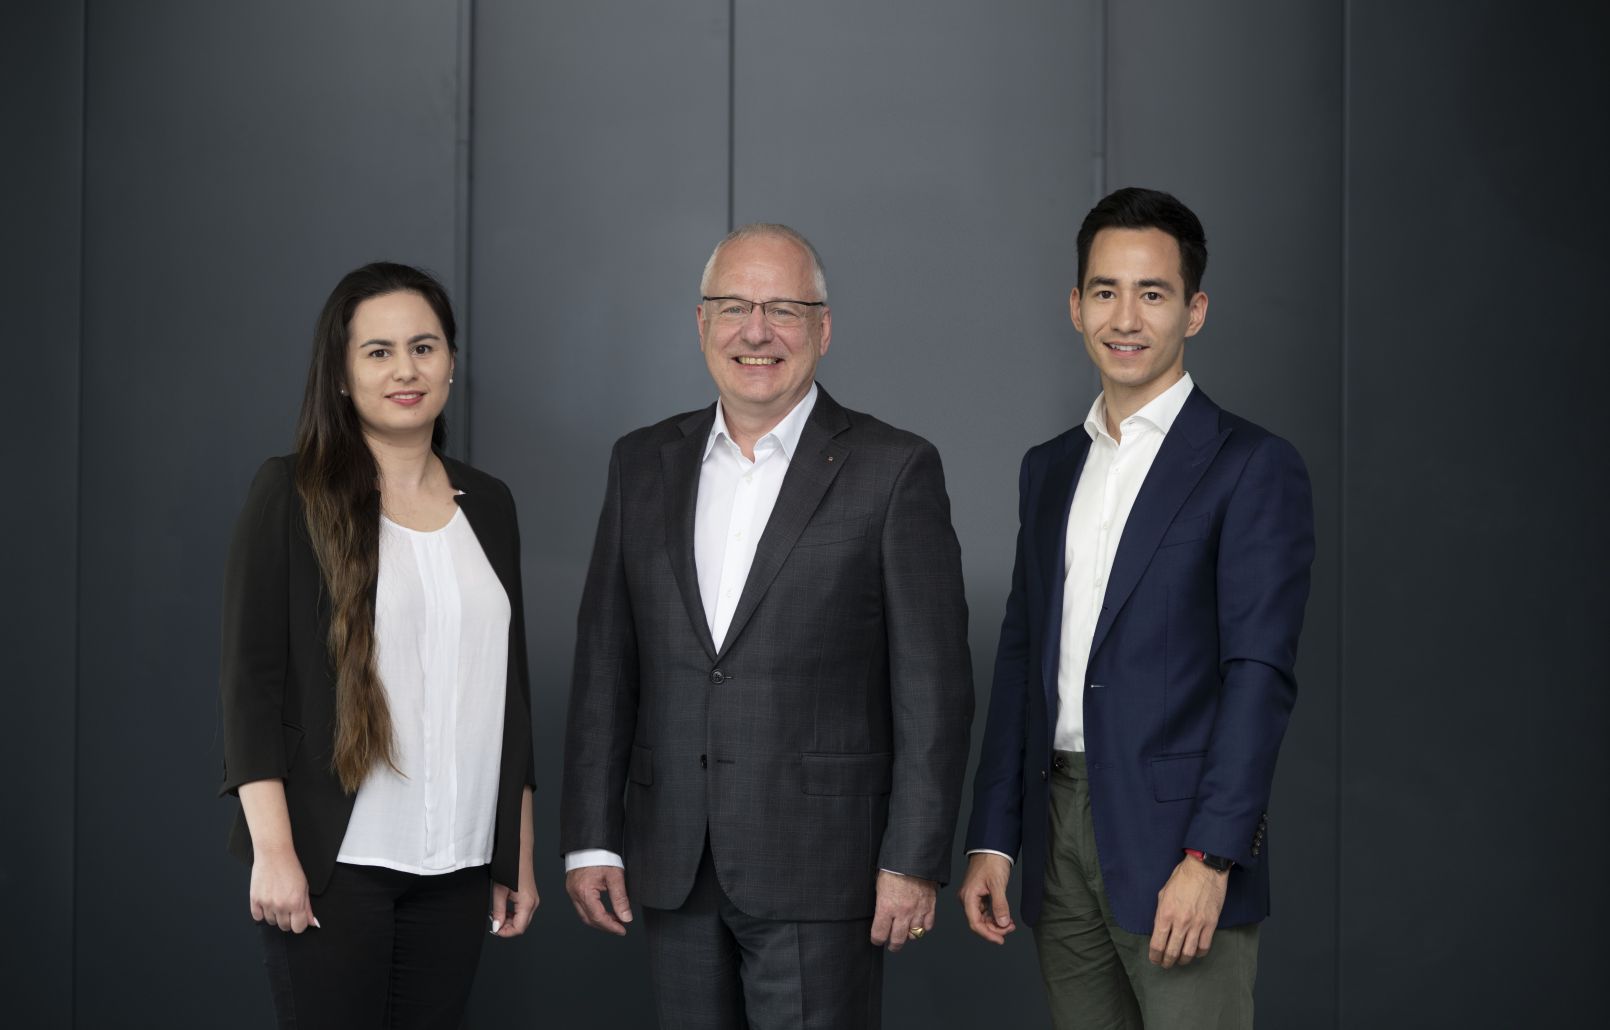 URMA - an internationally active family industrial company based in Rupperswil (AG): Urs W. Berner is proud of the succession solution with Jessica and Yannick Berner within the family. In his previous function, Urs W. Berner continues to work in URMA. 